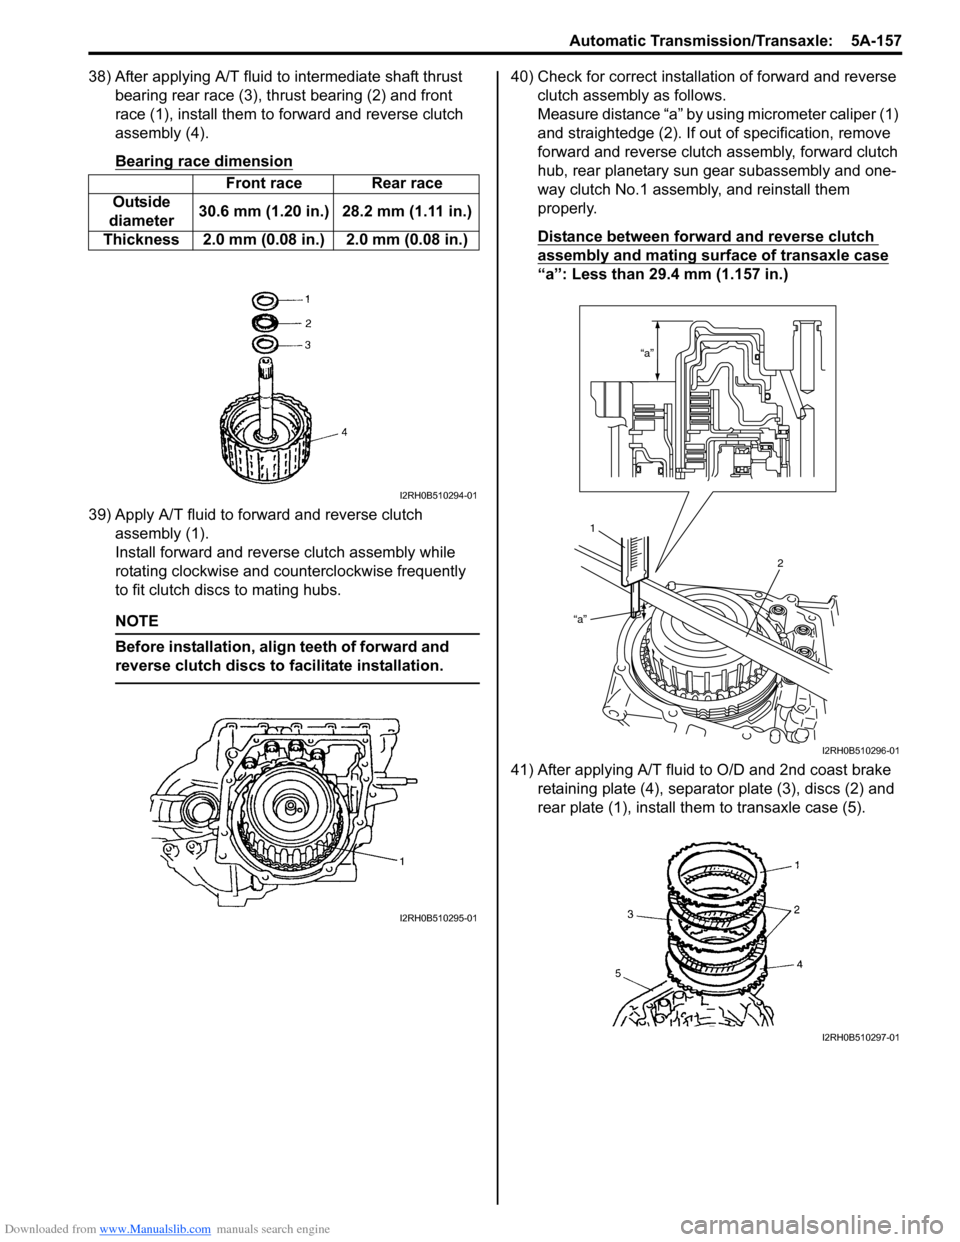 SUZUKI SWIFT 2007 2.G Service Workshop Manual Downloaded from www.Manualslib.com manuals search engine Automatic Transmission/Transaxle:  5A-157
38) After applying A/T fluid to intermediate shaft thrust bearing rear race (3), thrust bearing (2) a